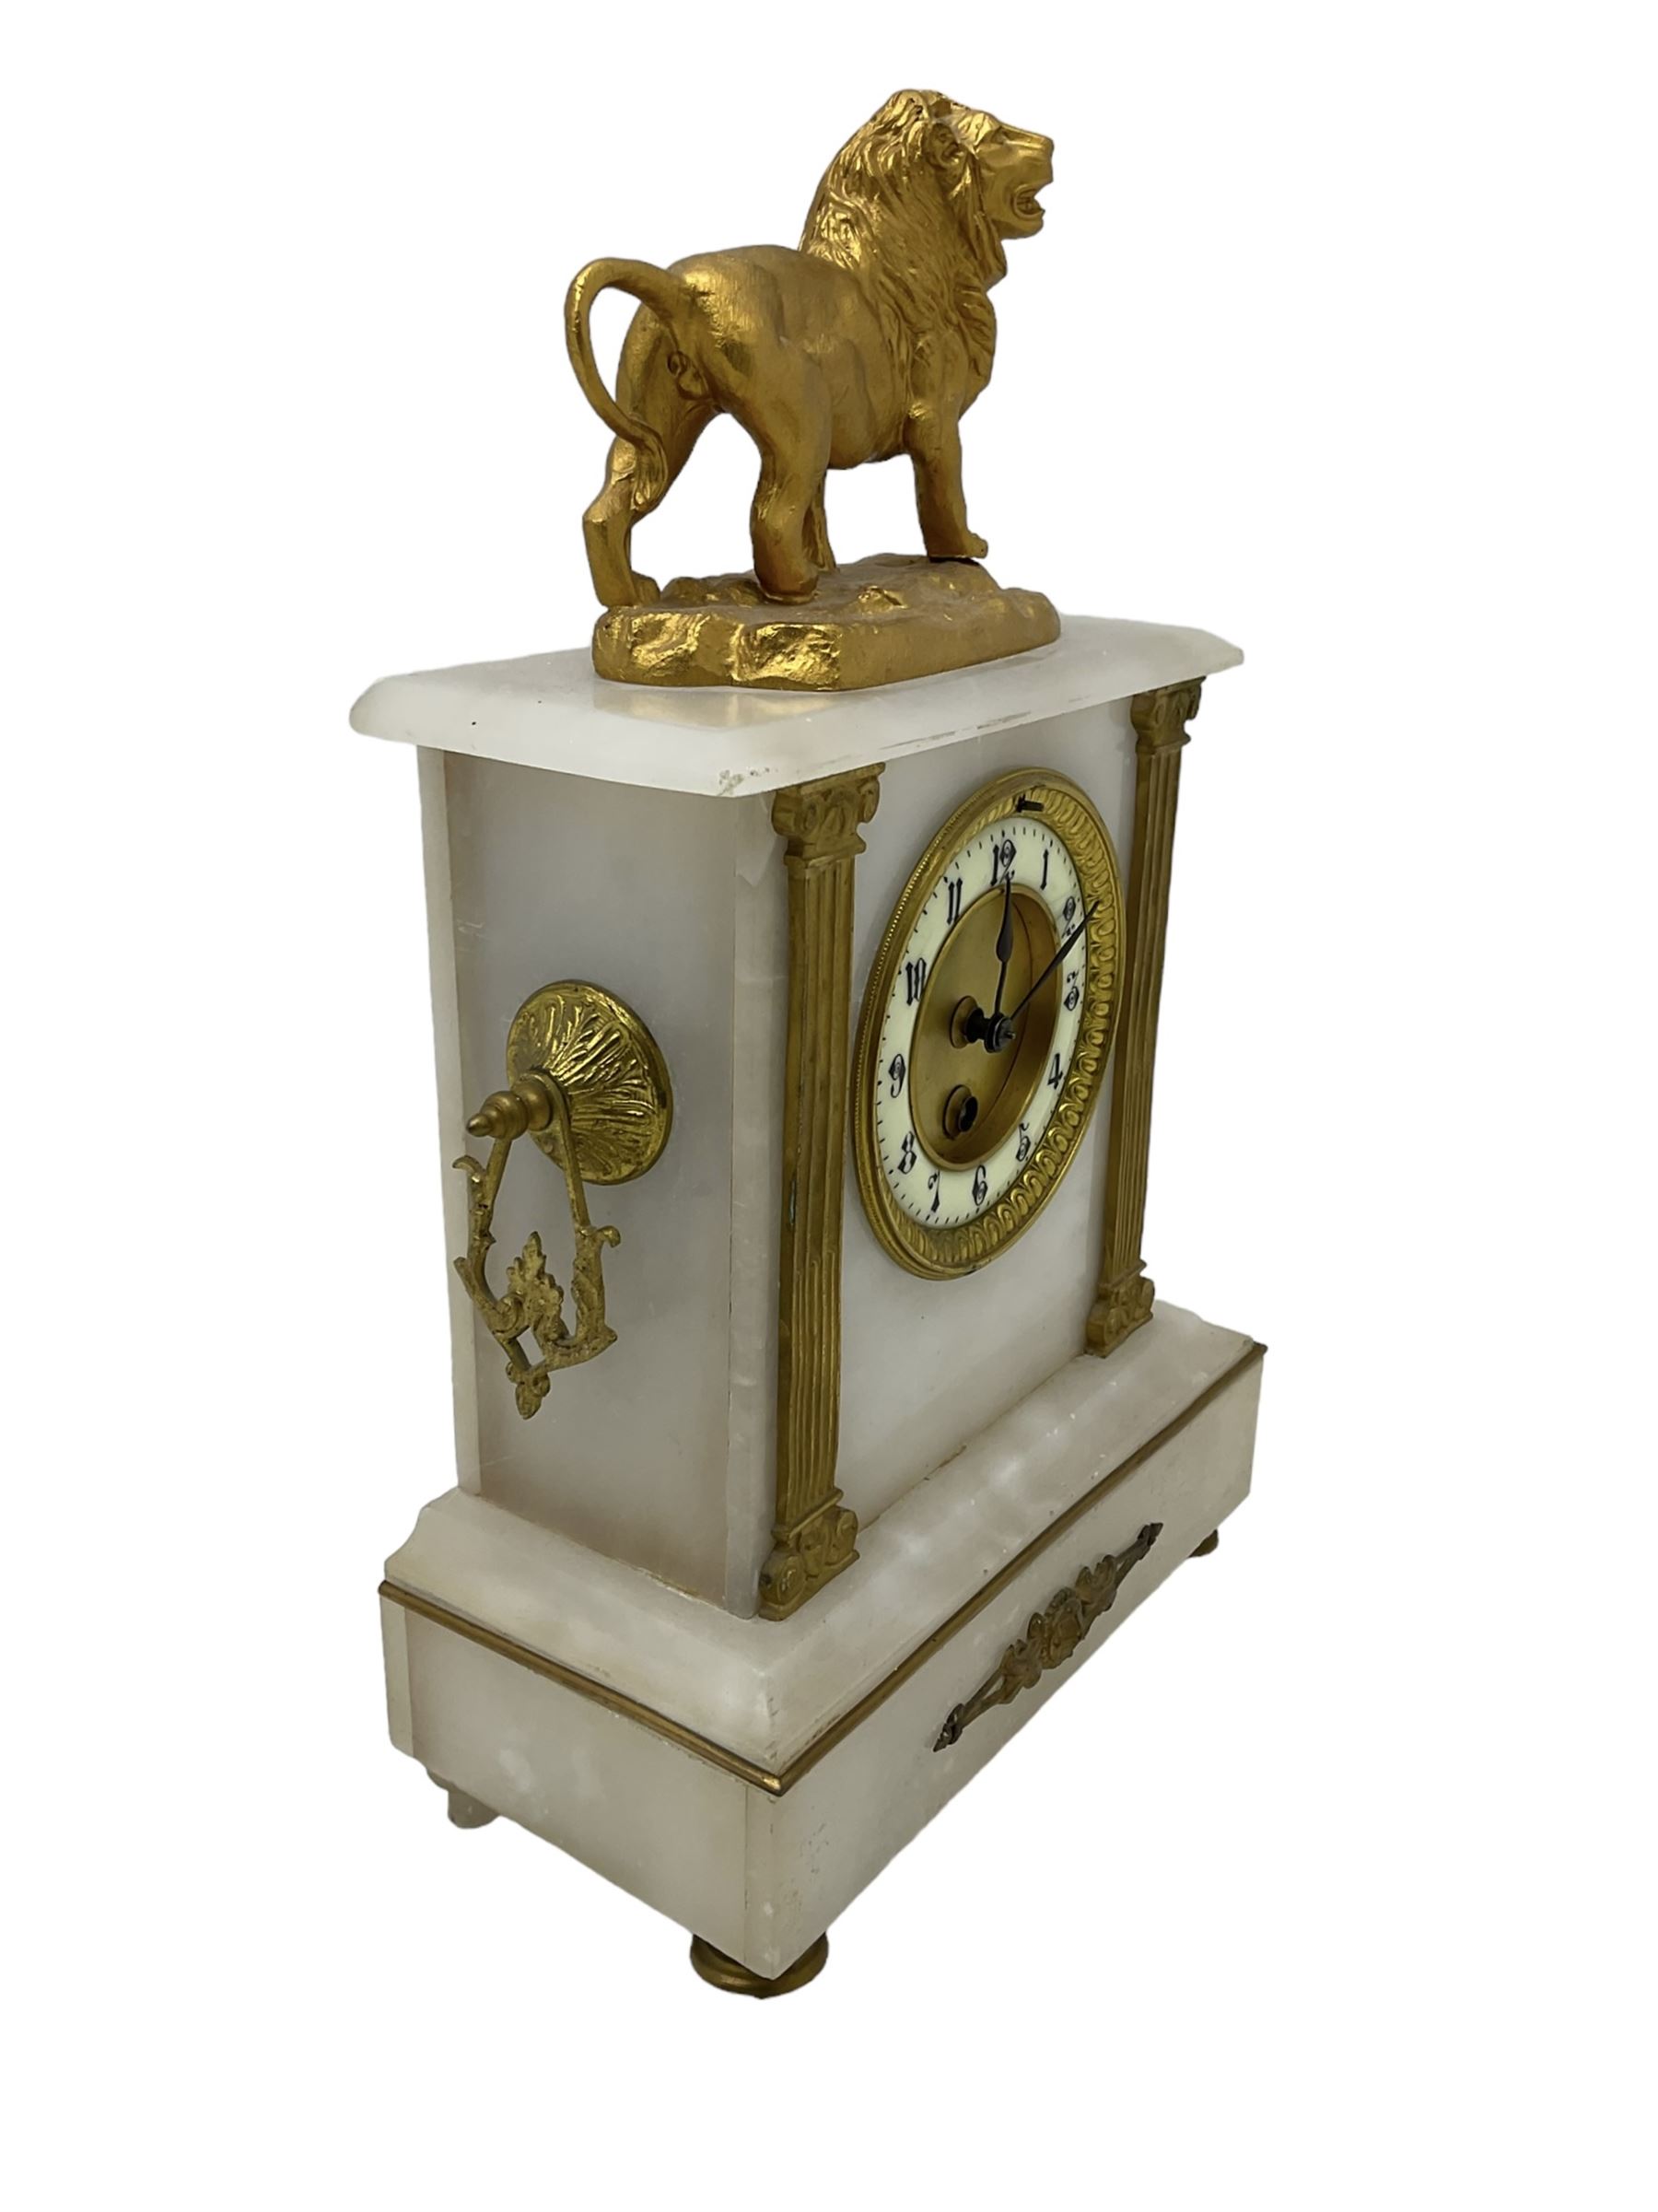 French - mid 19th century 8-day mantle clock in an alabaster case with a flat top surmounted by a gi - Image 4 of 4